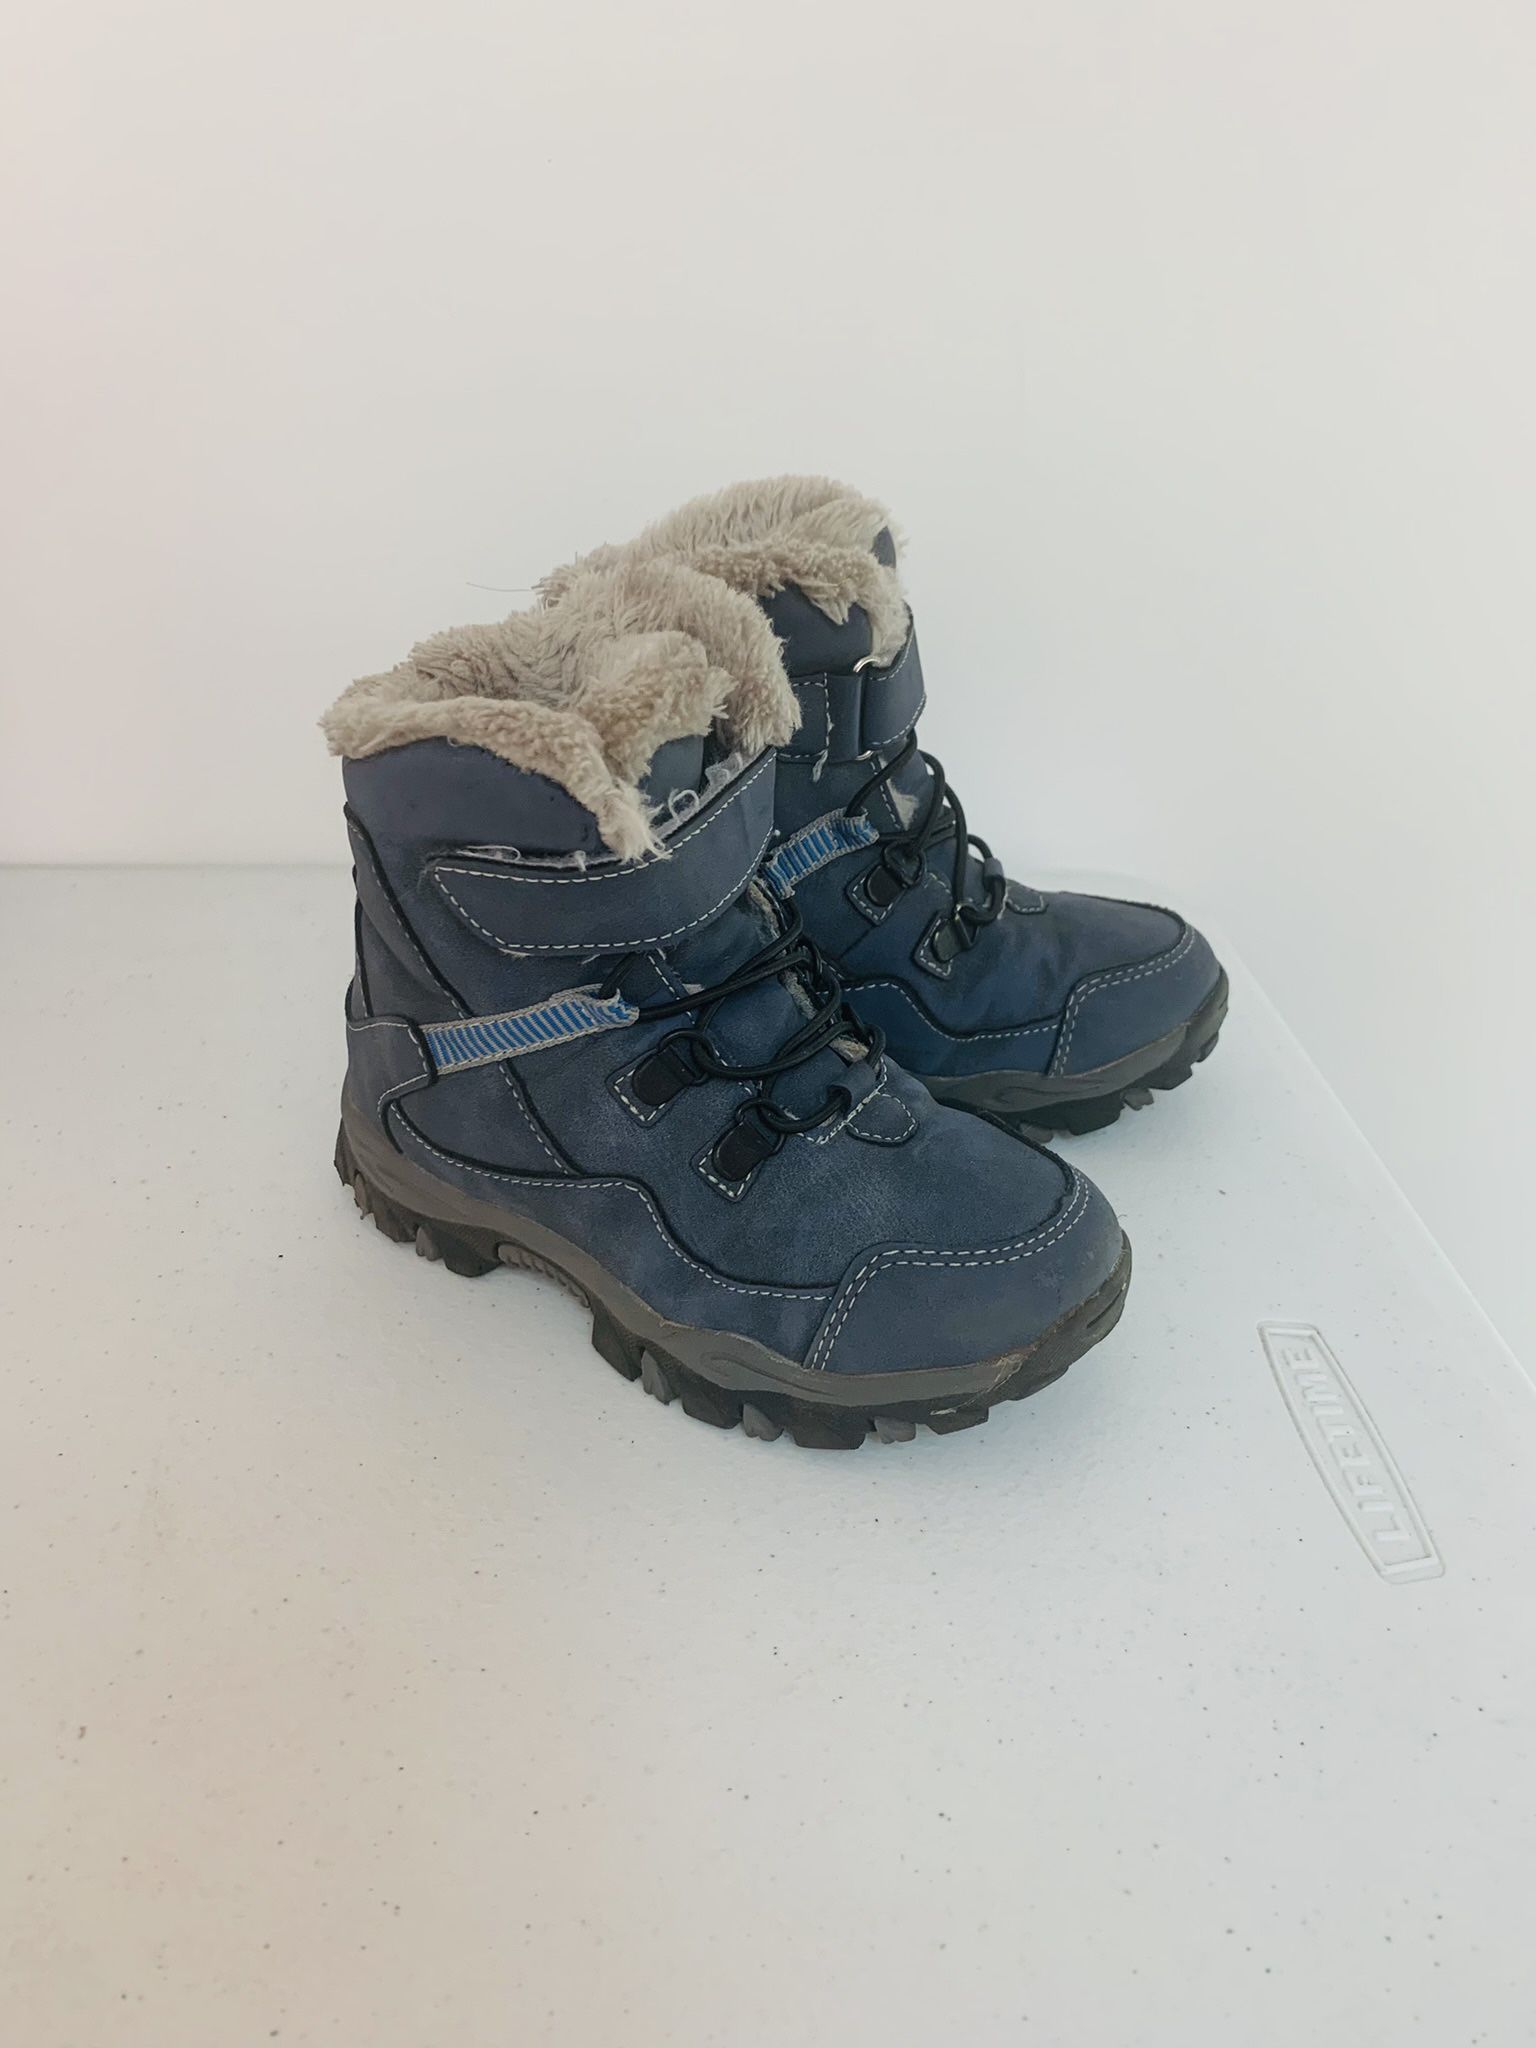 Warm Durable Rain / Snow Boots Shoes For Kids Toddler Ages 4-5 Years Old. Very Warm And Cozy Waterproof Size Is 11